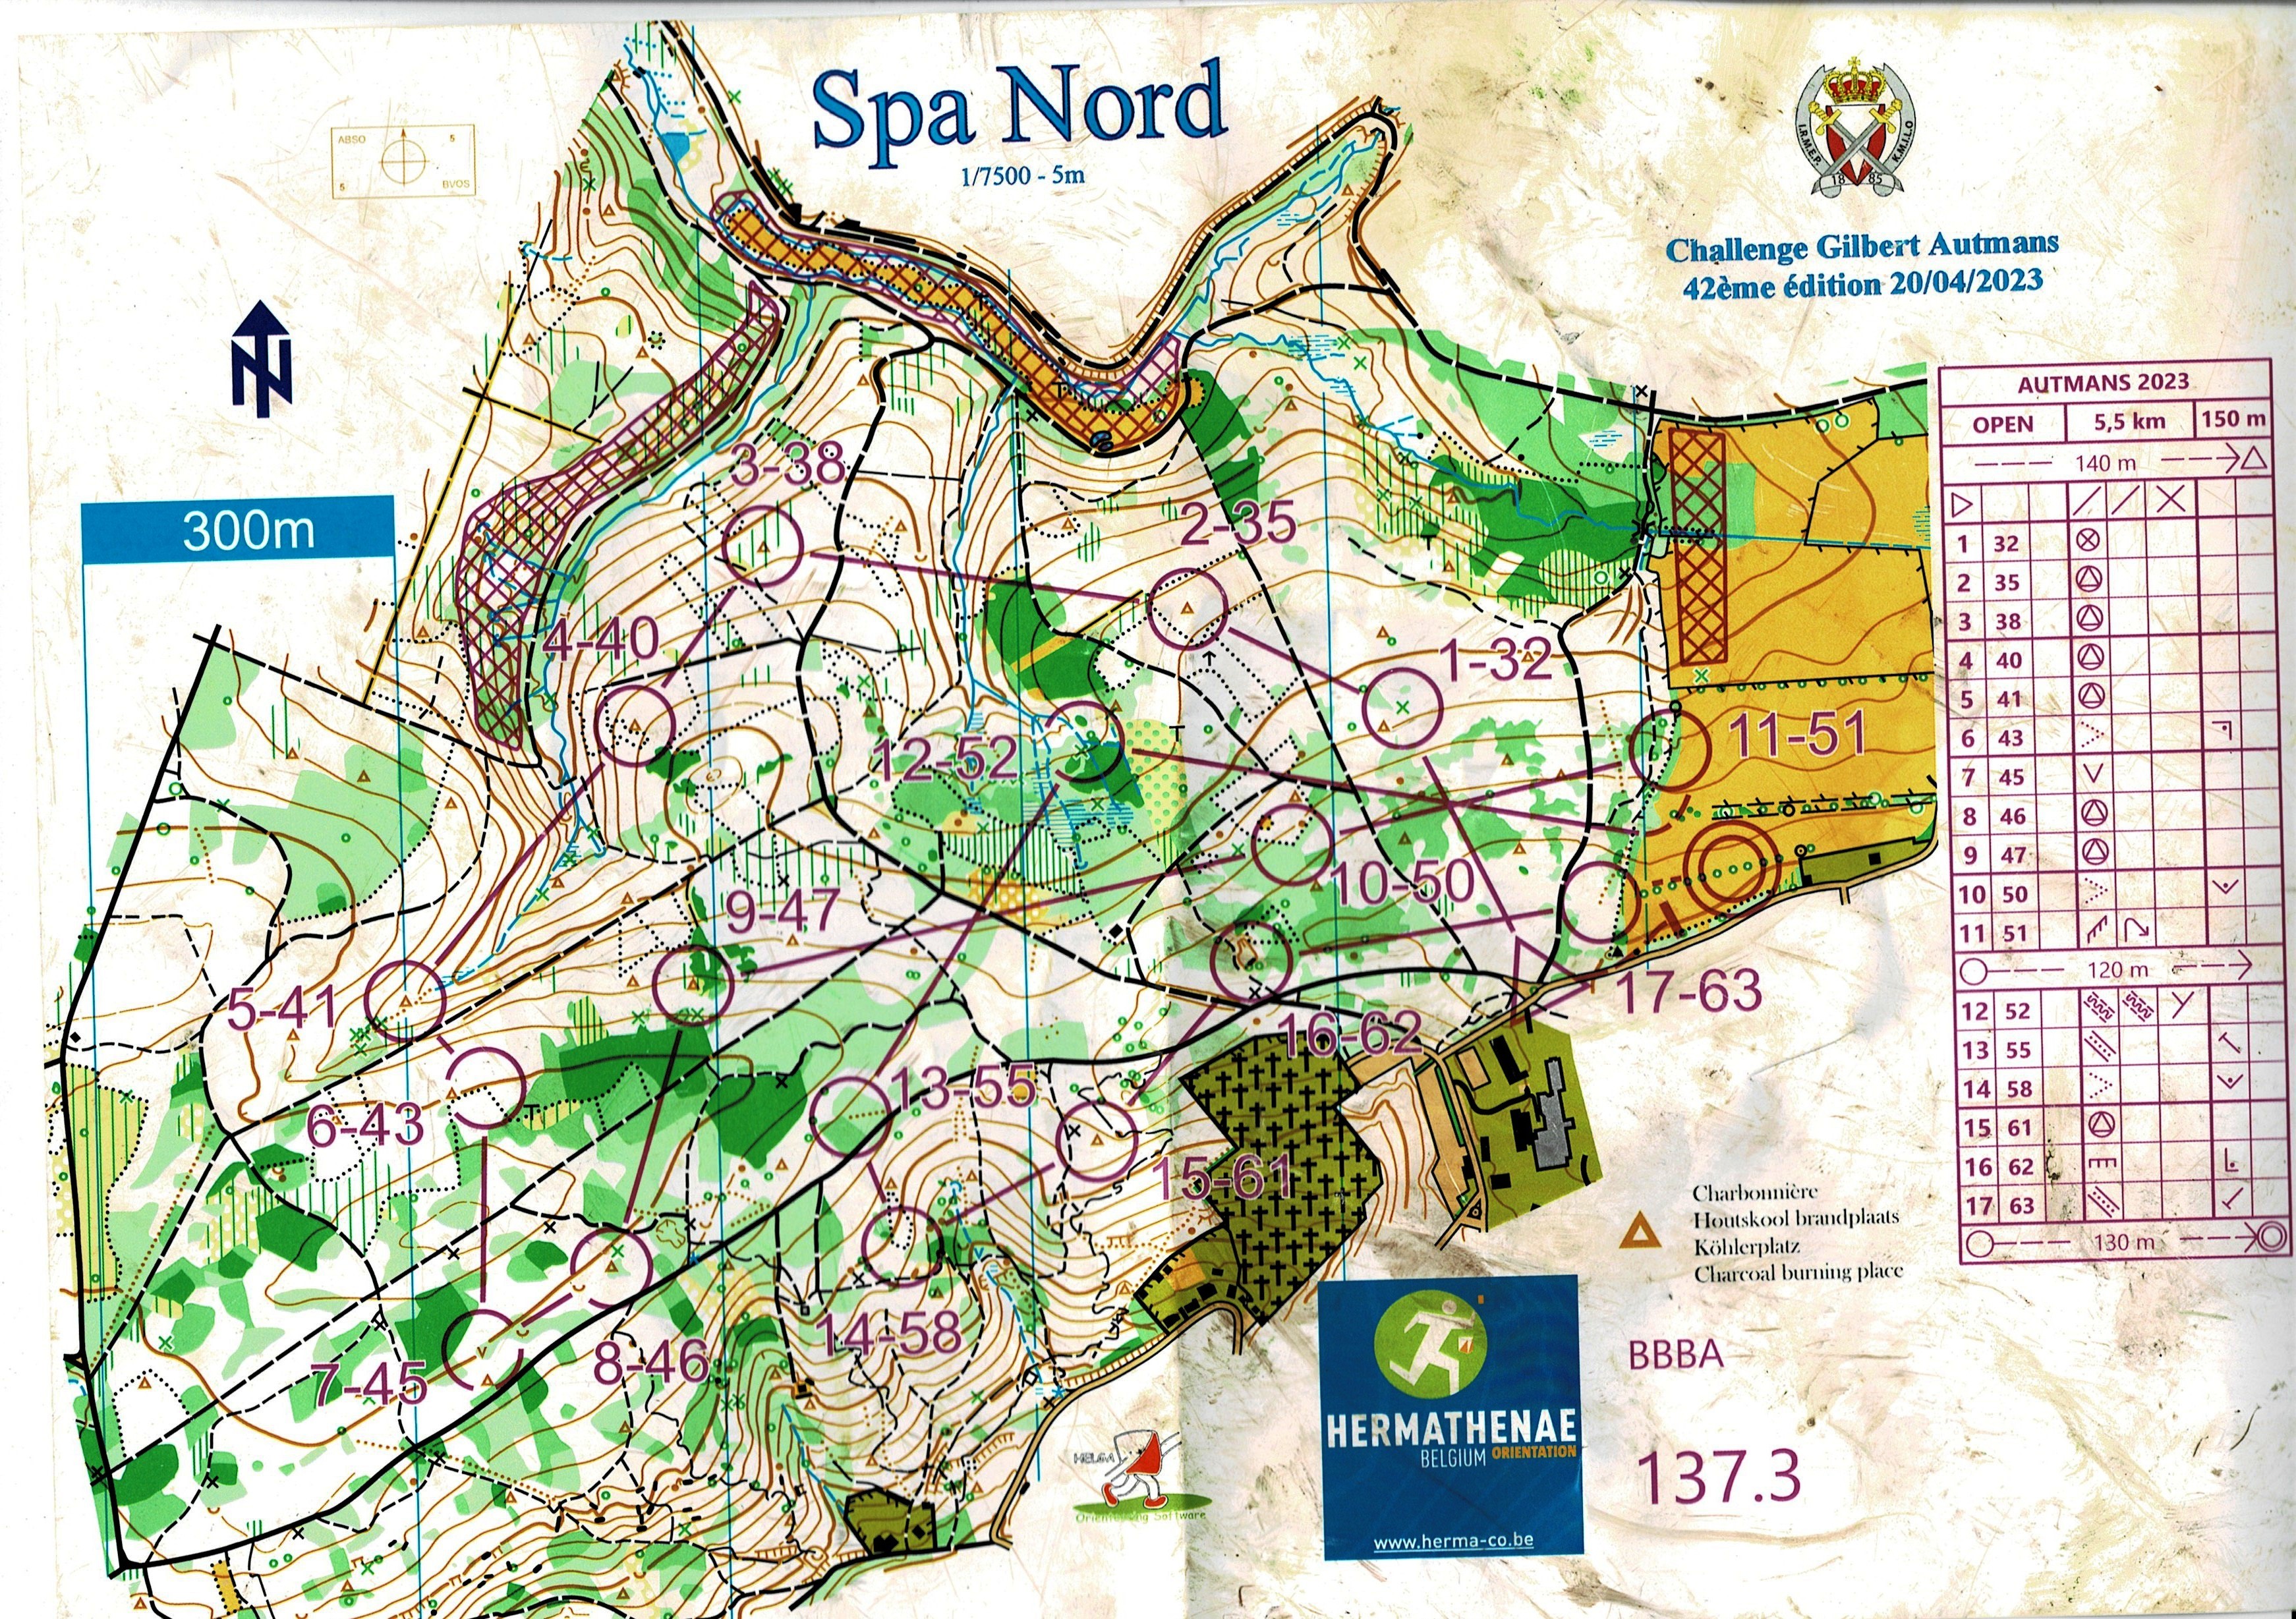 Spa Nord (20.04.2023)